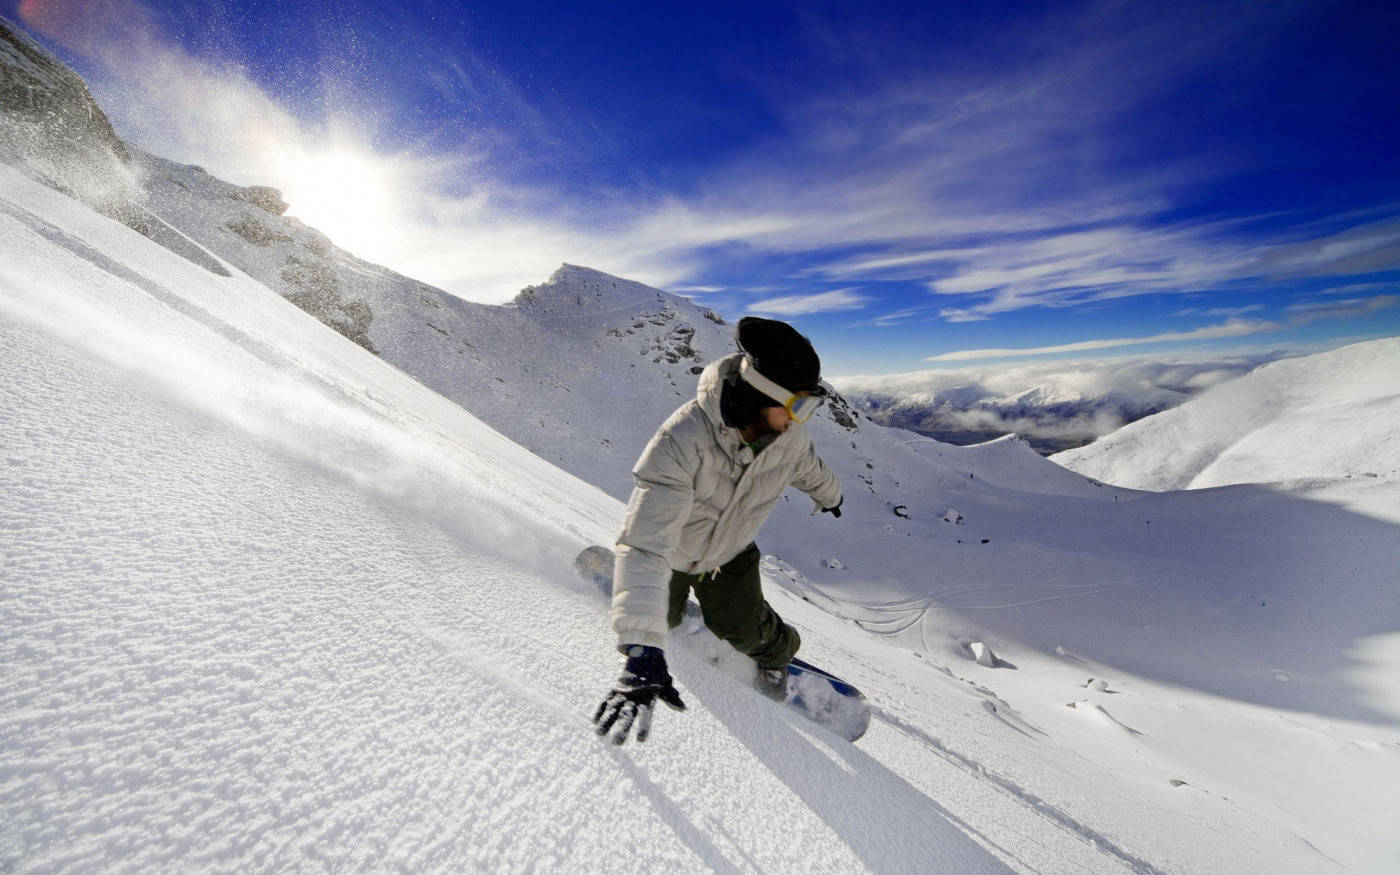 Man In White With Snowboard Descending A Slope Background